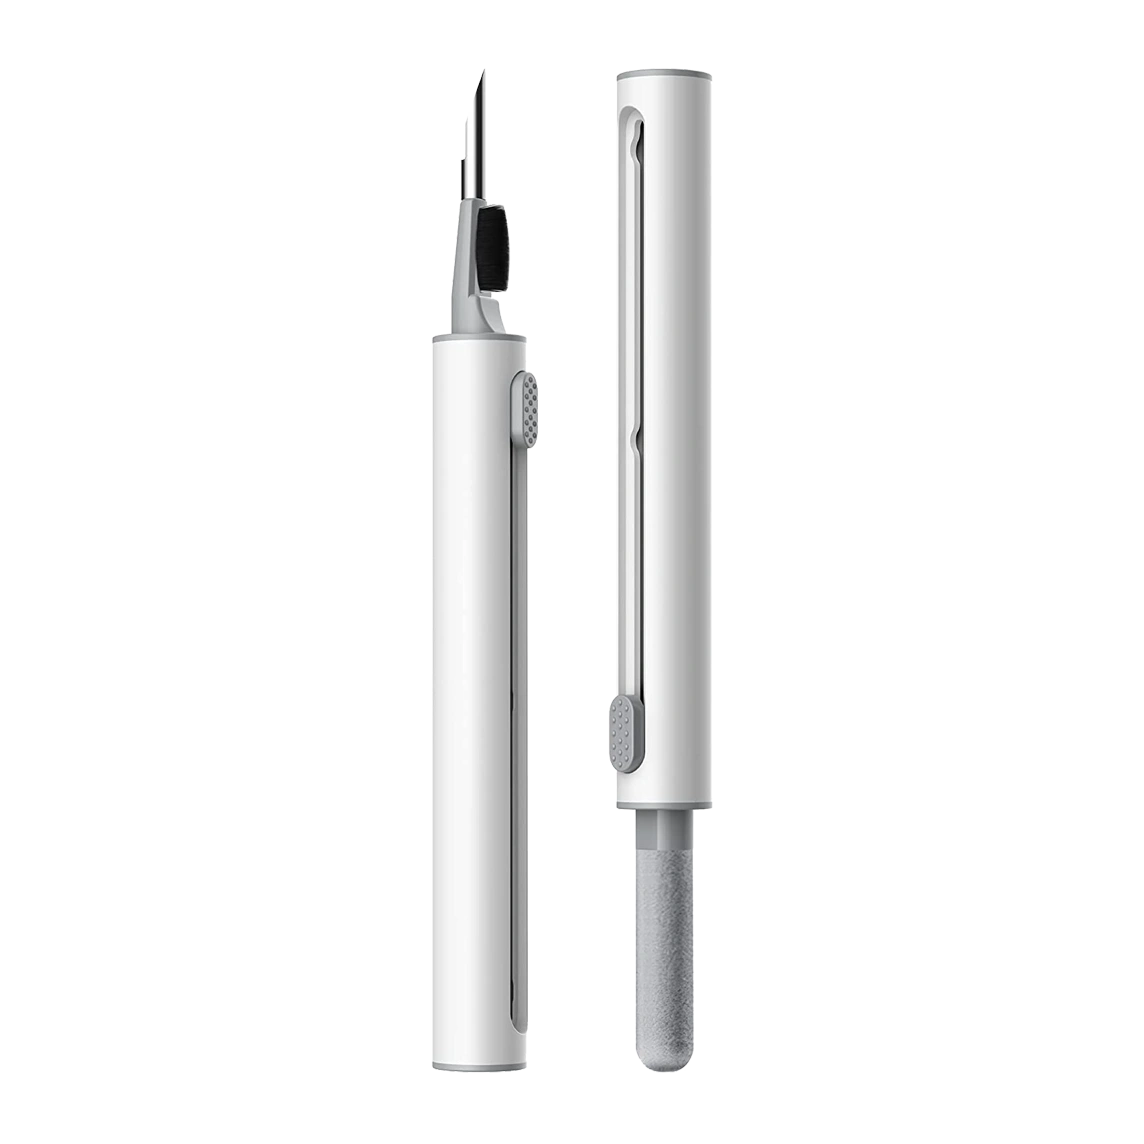 airpods-and-iphone-cleaning-kit-pen